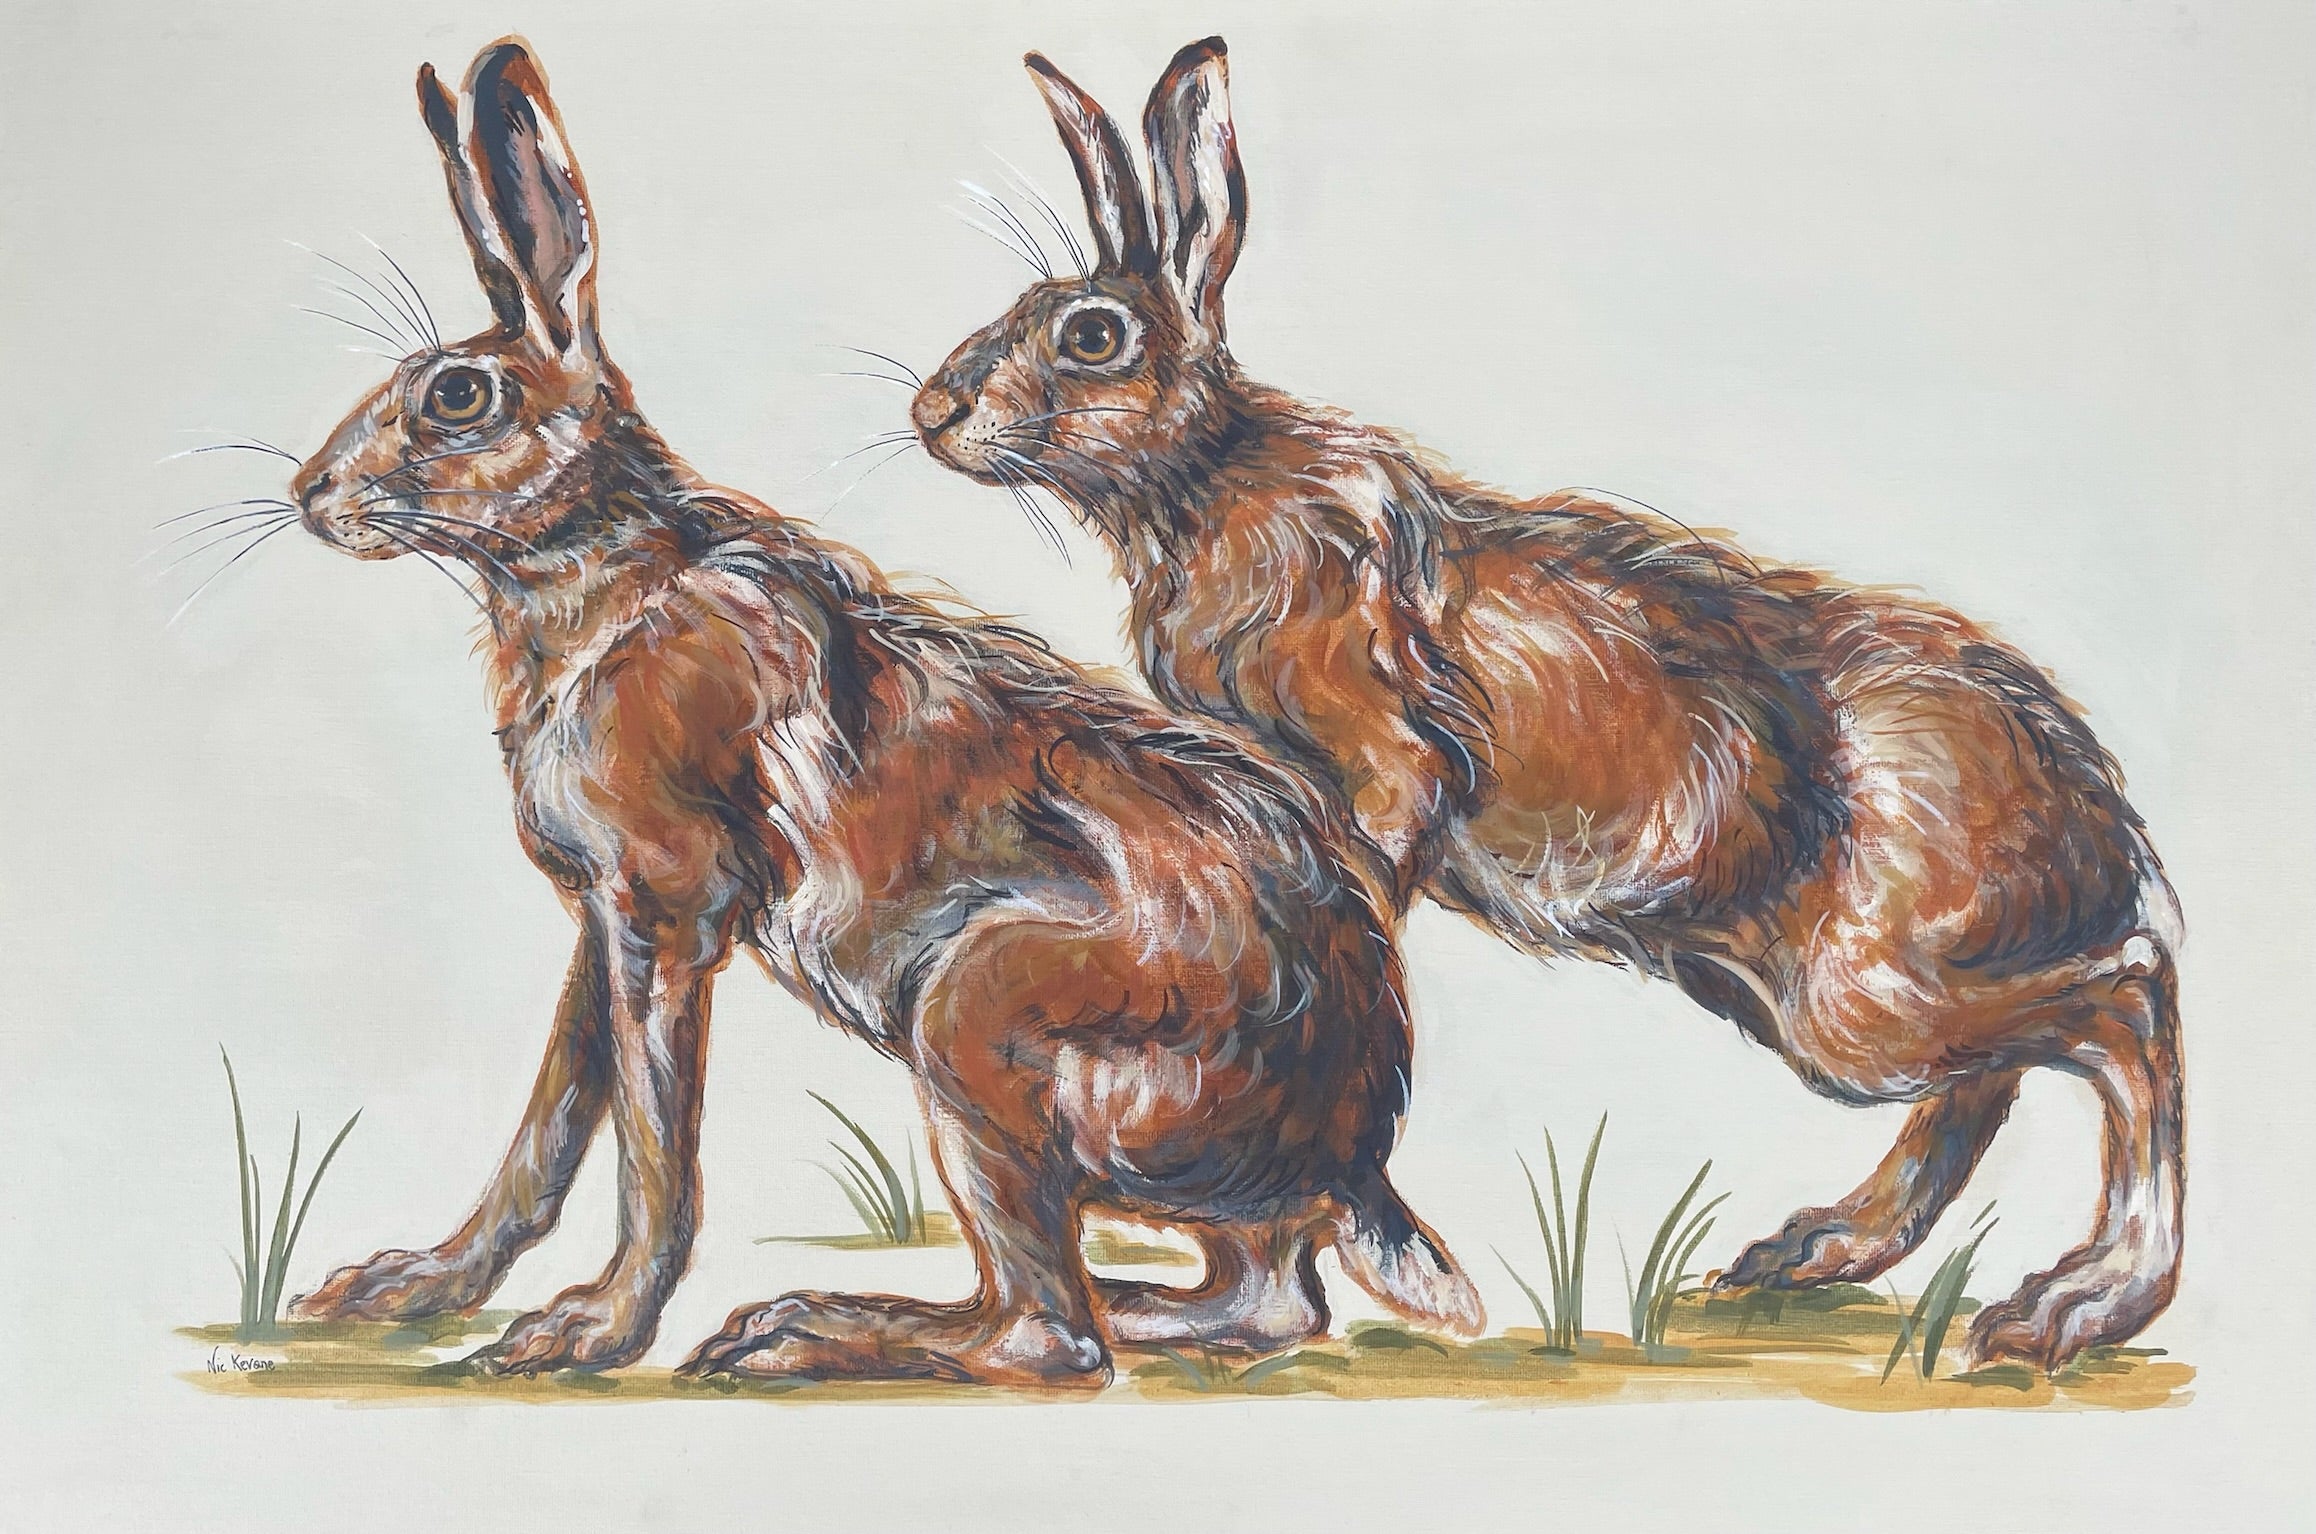 Leery Hares is a painting of wary hares before they dash away.  Their coats are beautiful to paint, with many shades of grey and brown.  Leery is another word meaning wary. This is part of a study of hares, the other being my painting Chary Hares.